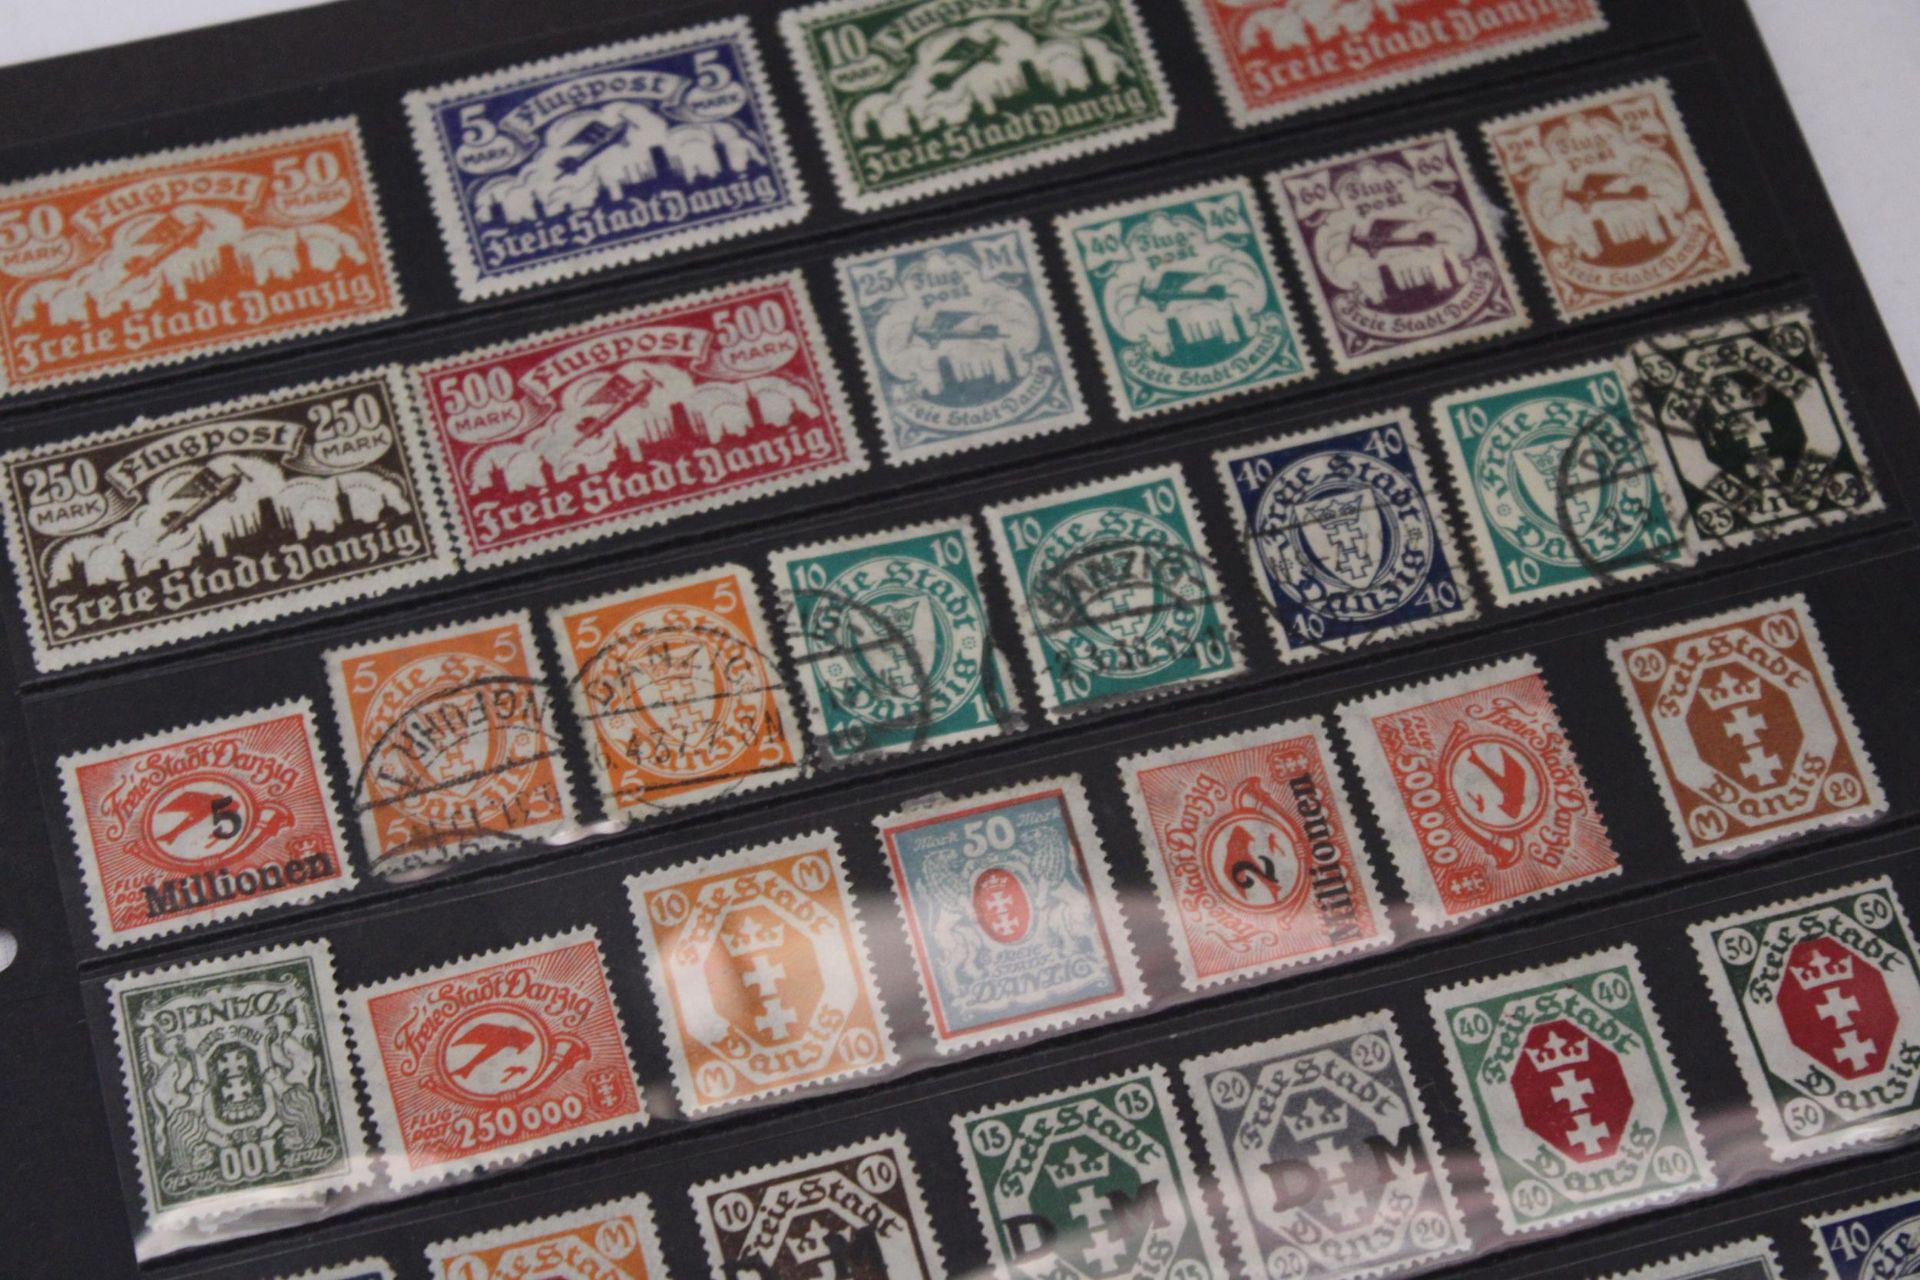 TWO PAGES OF DANZIG STAMPS - Image 4 of 5